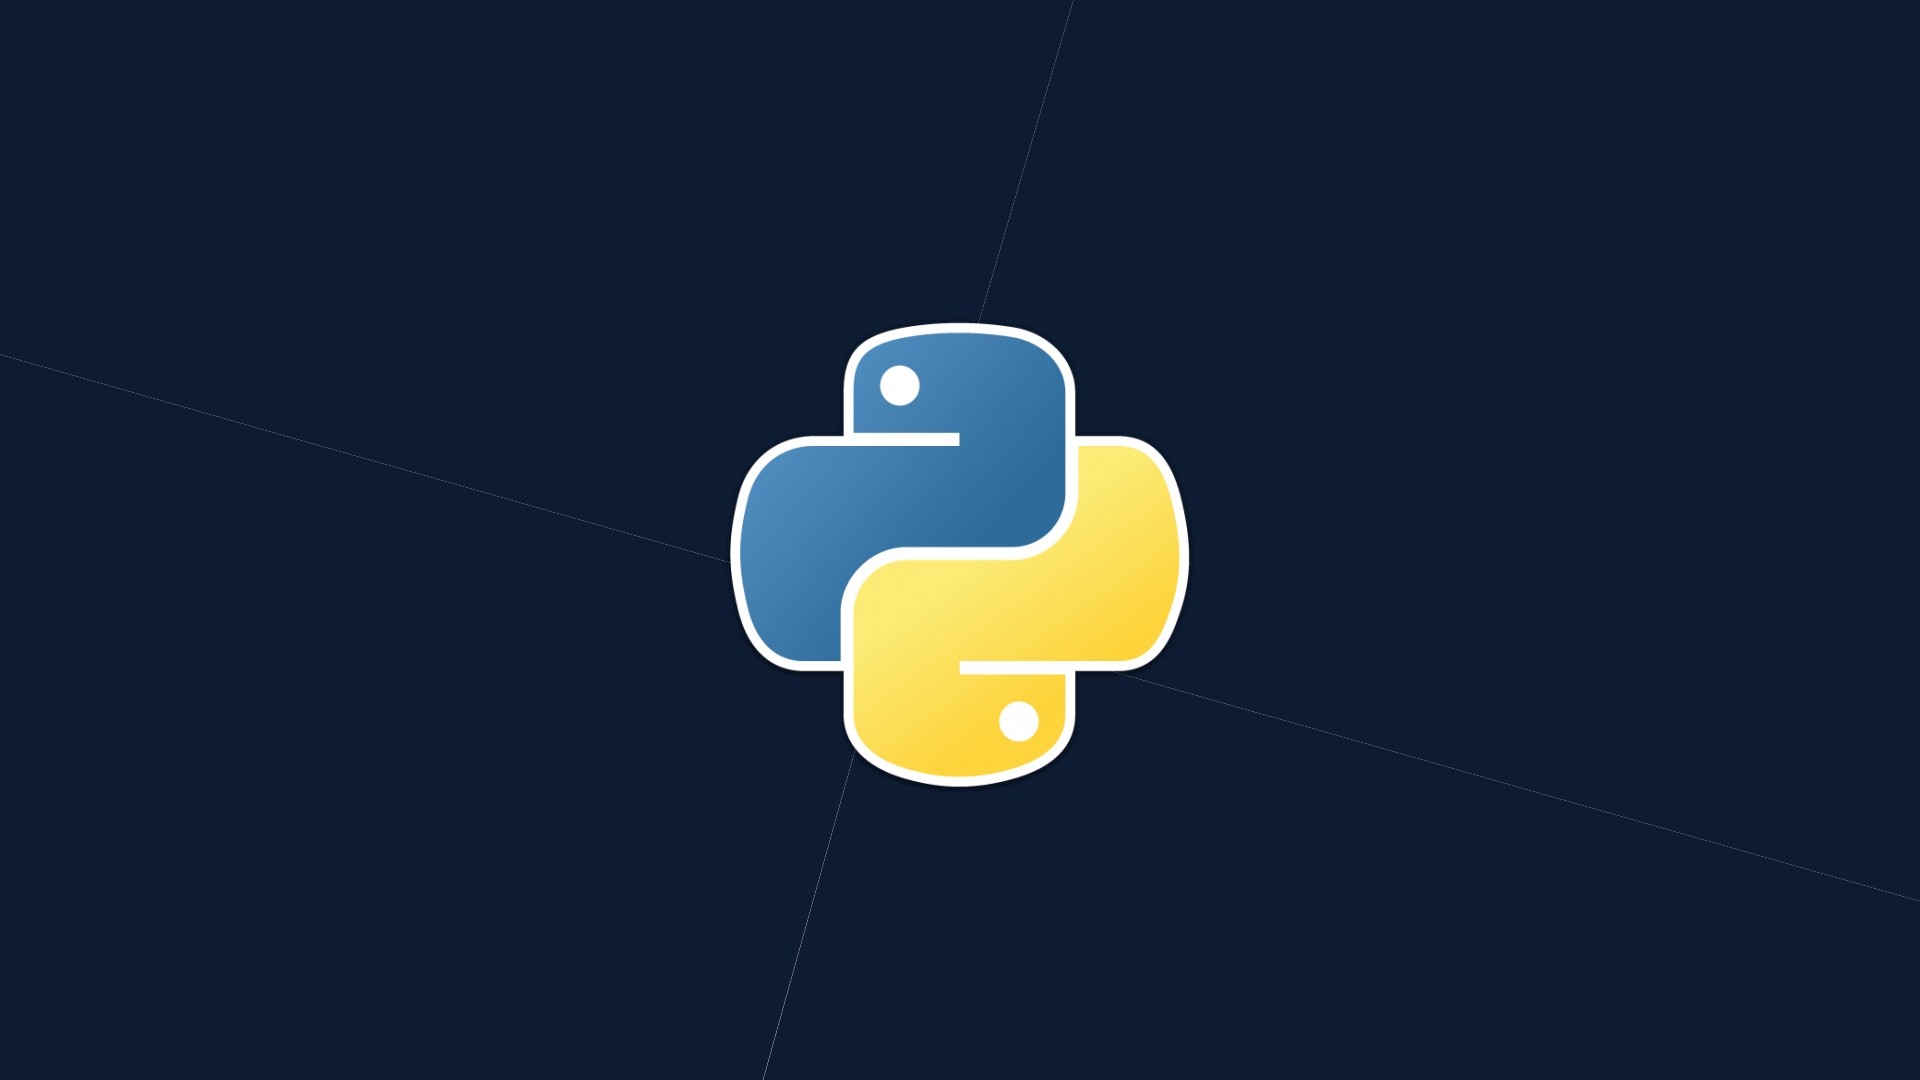 A learning timeline for python beginners.